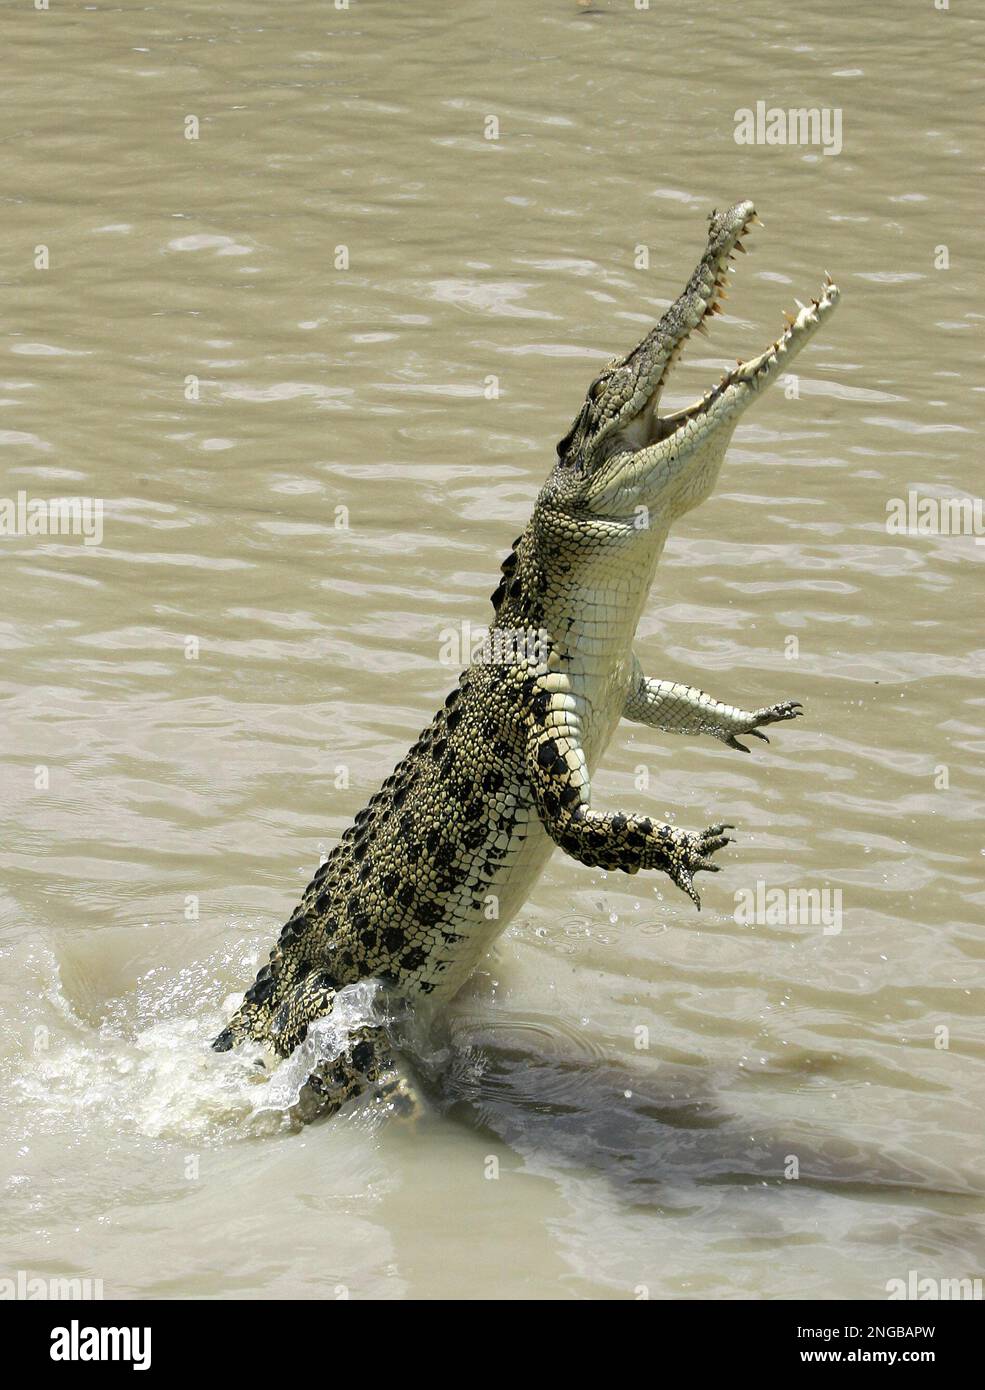 A saltwater crocodile leaps high out of the water on the Adelaide river, 60  kilometers (35 miles) from Darwin, in Australia's Northern Territory,  Saturday, Oct. 15, 2005. With its speed and agility